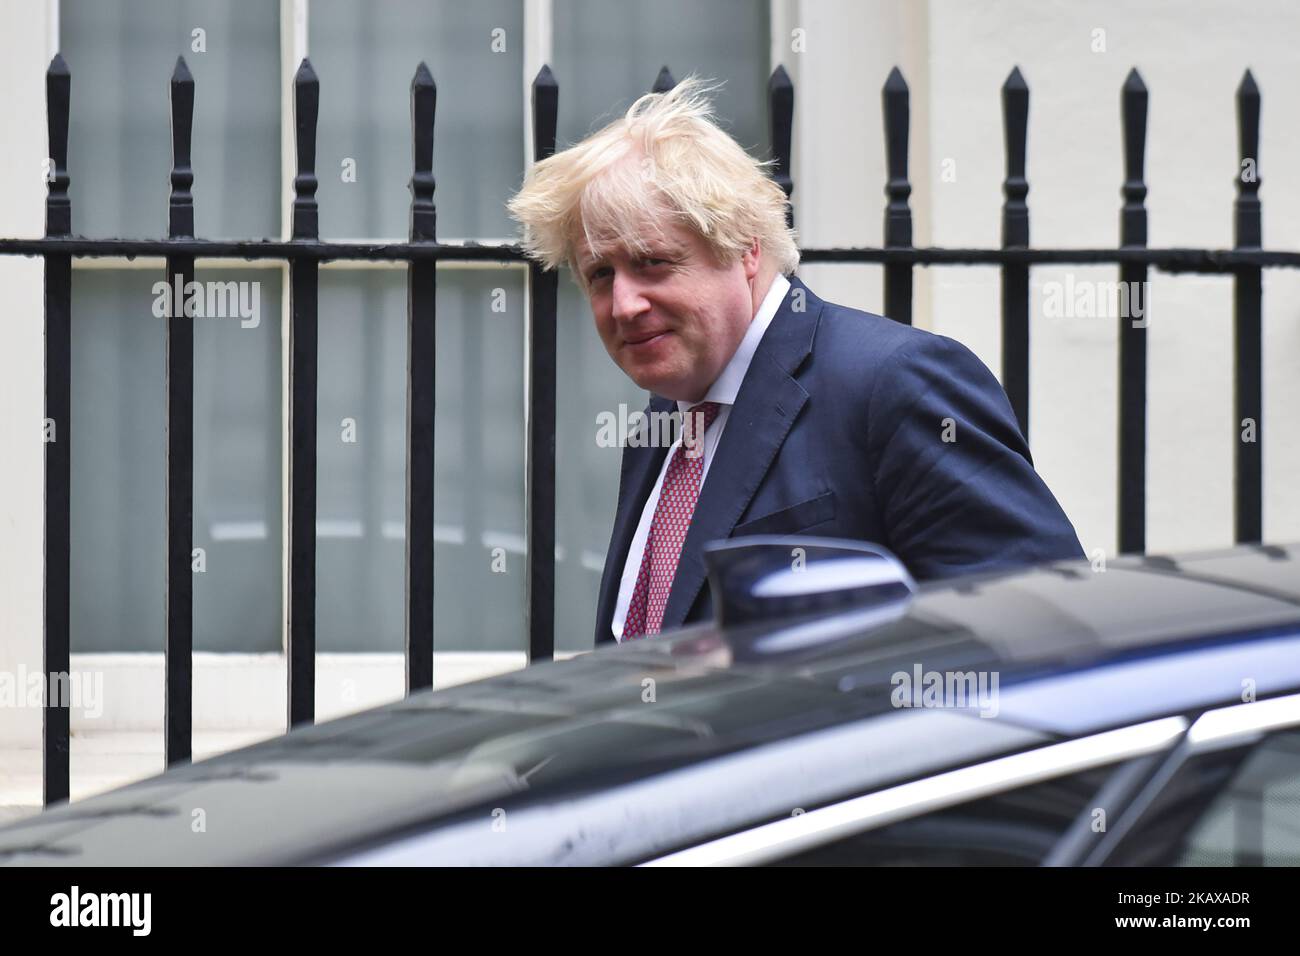 British Foreign Secretary Boris Johnson leaves 10 Downing Street after attending the weekly Cabinet Meeting, London on March 27, 2018. Prime Minister Theresa May is facing another Brexit hurdle after the opposition Labour Party announced its pushing for a legal commitment to avoid a hard border with Ireland after Britain leaves the European Union. The Migration Advisory Committee (MAC) said businesses are concerned about their ability to recruit workers from the EU after Britain leaves the EU. UK employers also see EU workers as 'more reliable' and eager than their British counterparts, the re Stock Photo